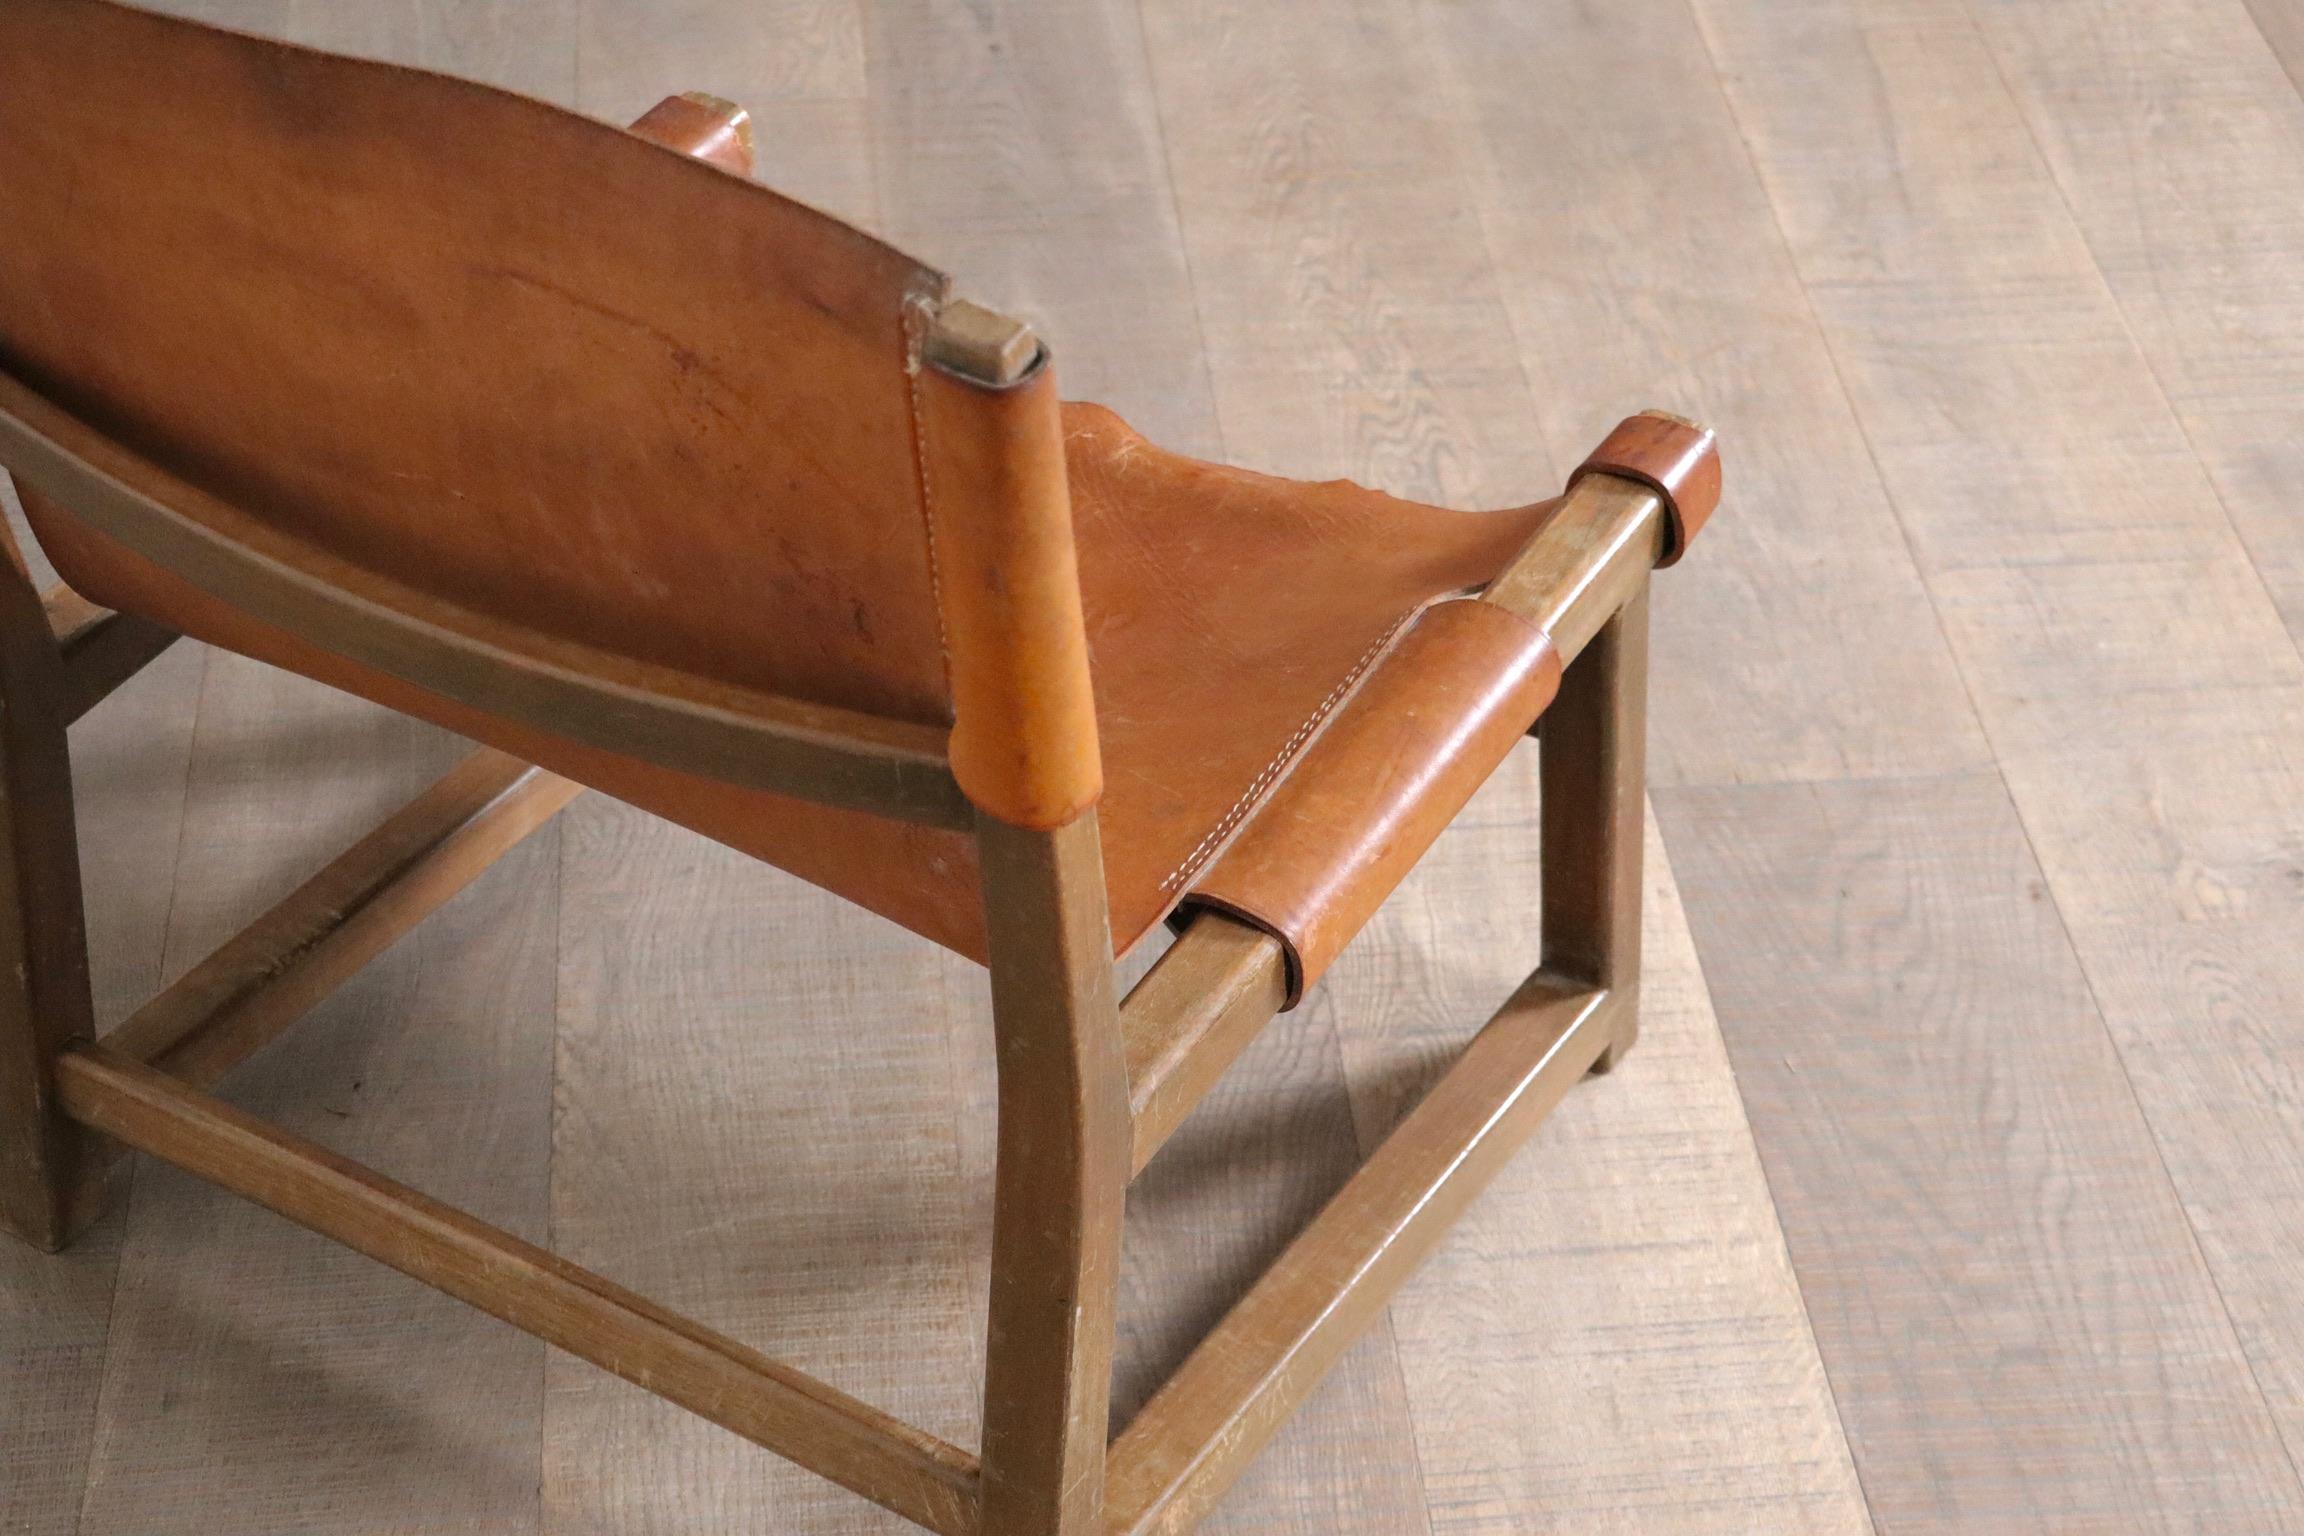 Pair Of Riaza Chairs In Cognac Leather By Paco Muñoz For Darro Gallery, Spain, 1 For Sale 9